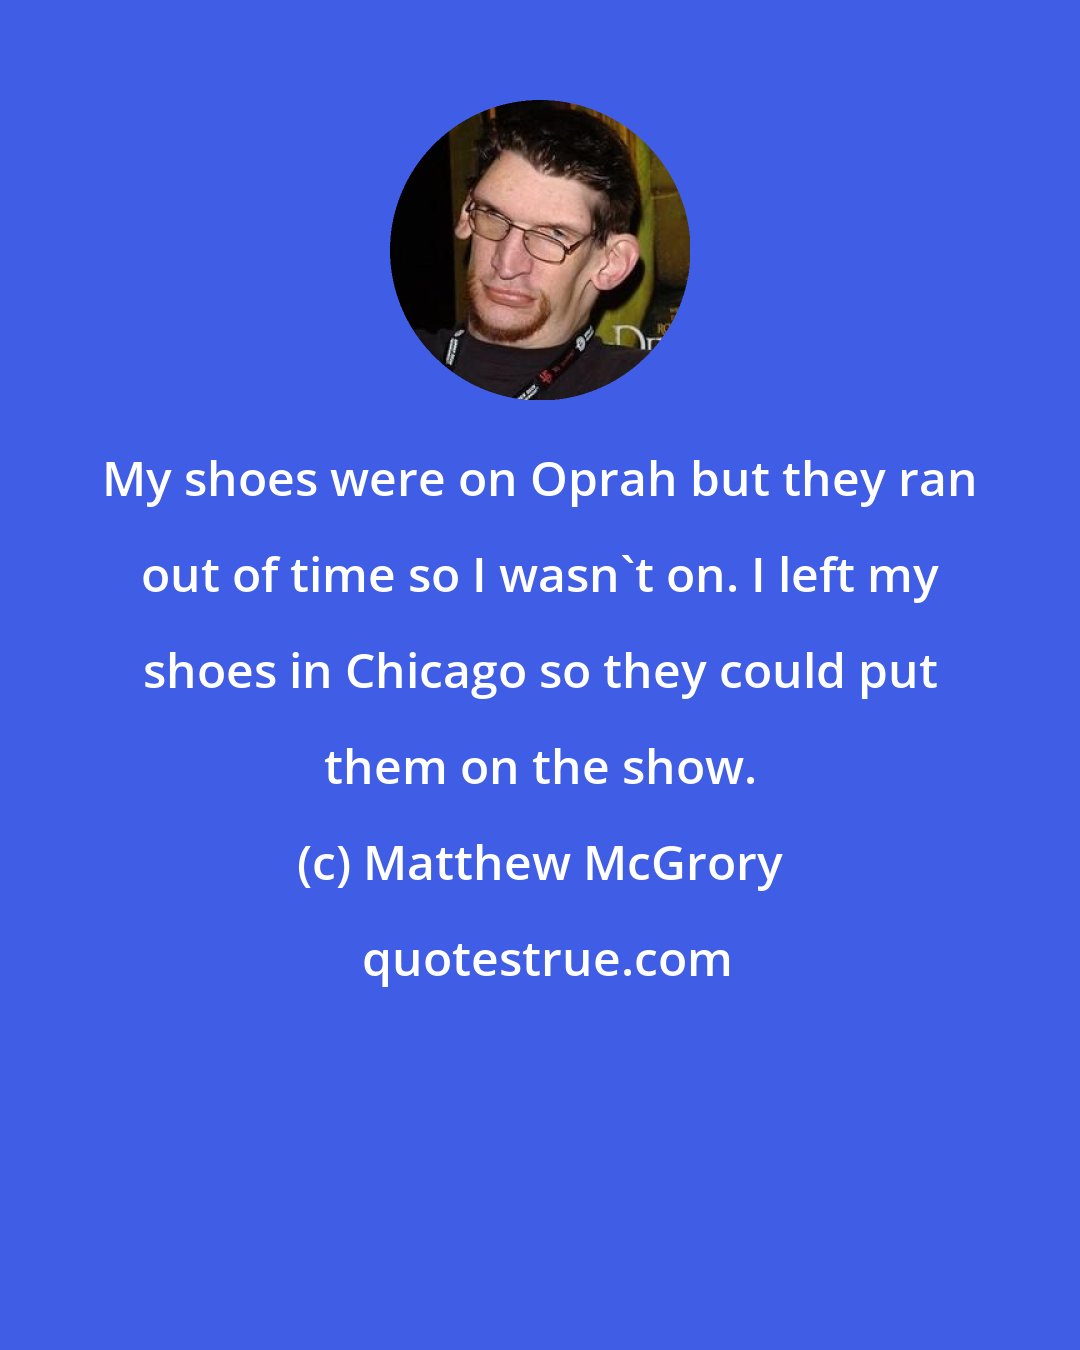 Matthew McGrory: My shoes were on Oprah but they ran out of time so I wasn't on. I left my shoes in Chicago so they could put them on the show.